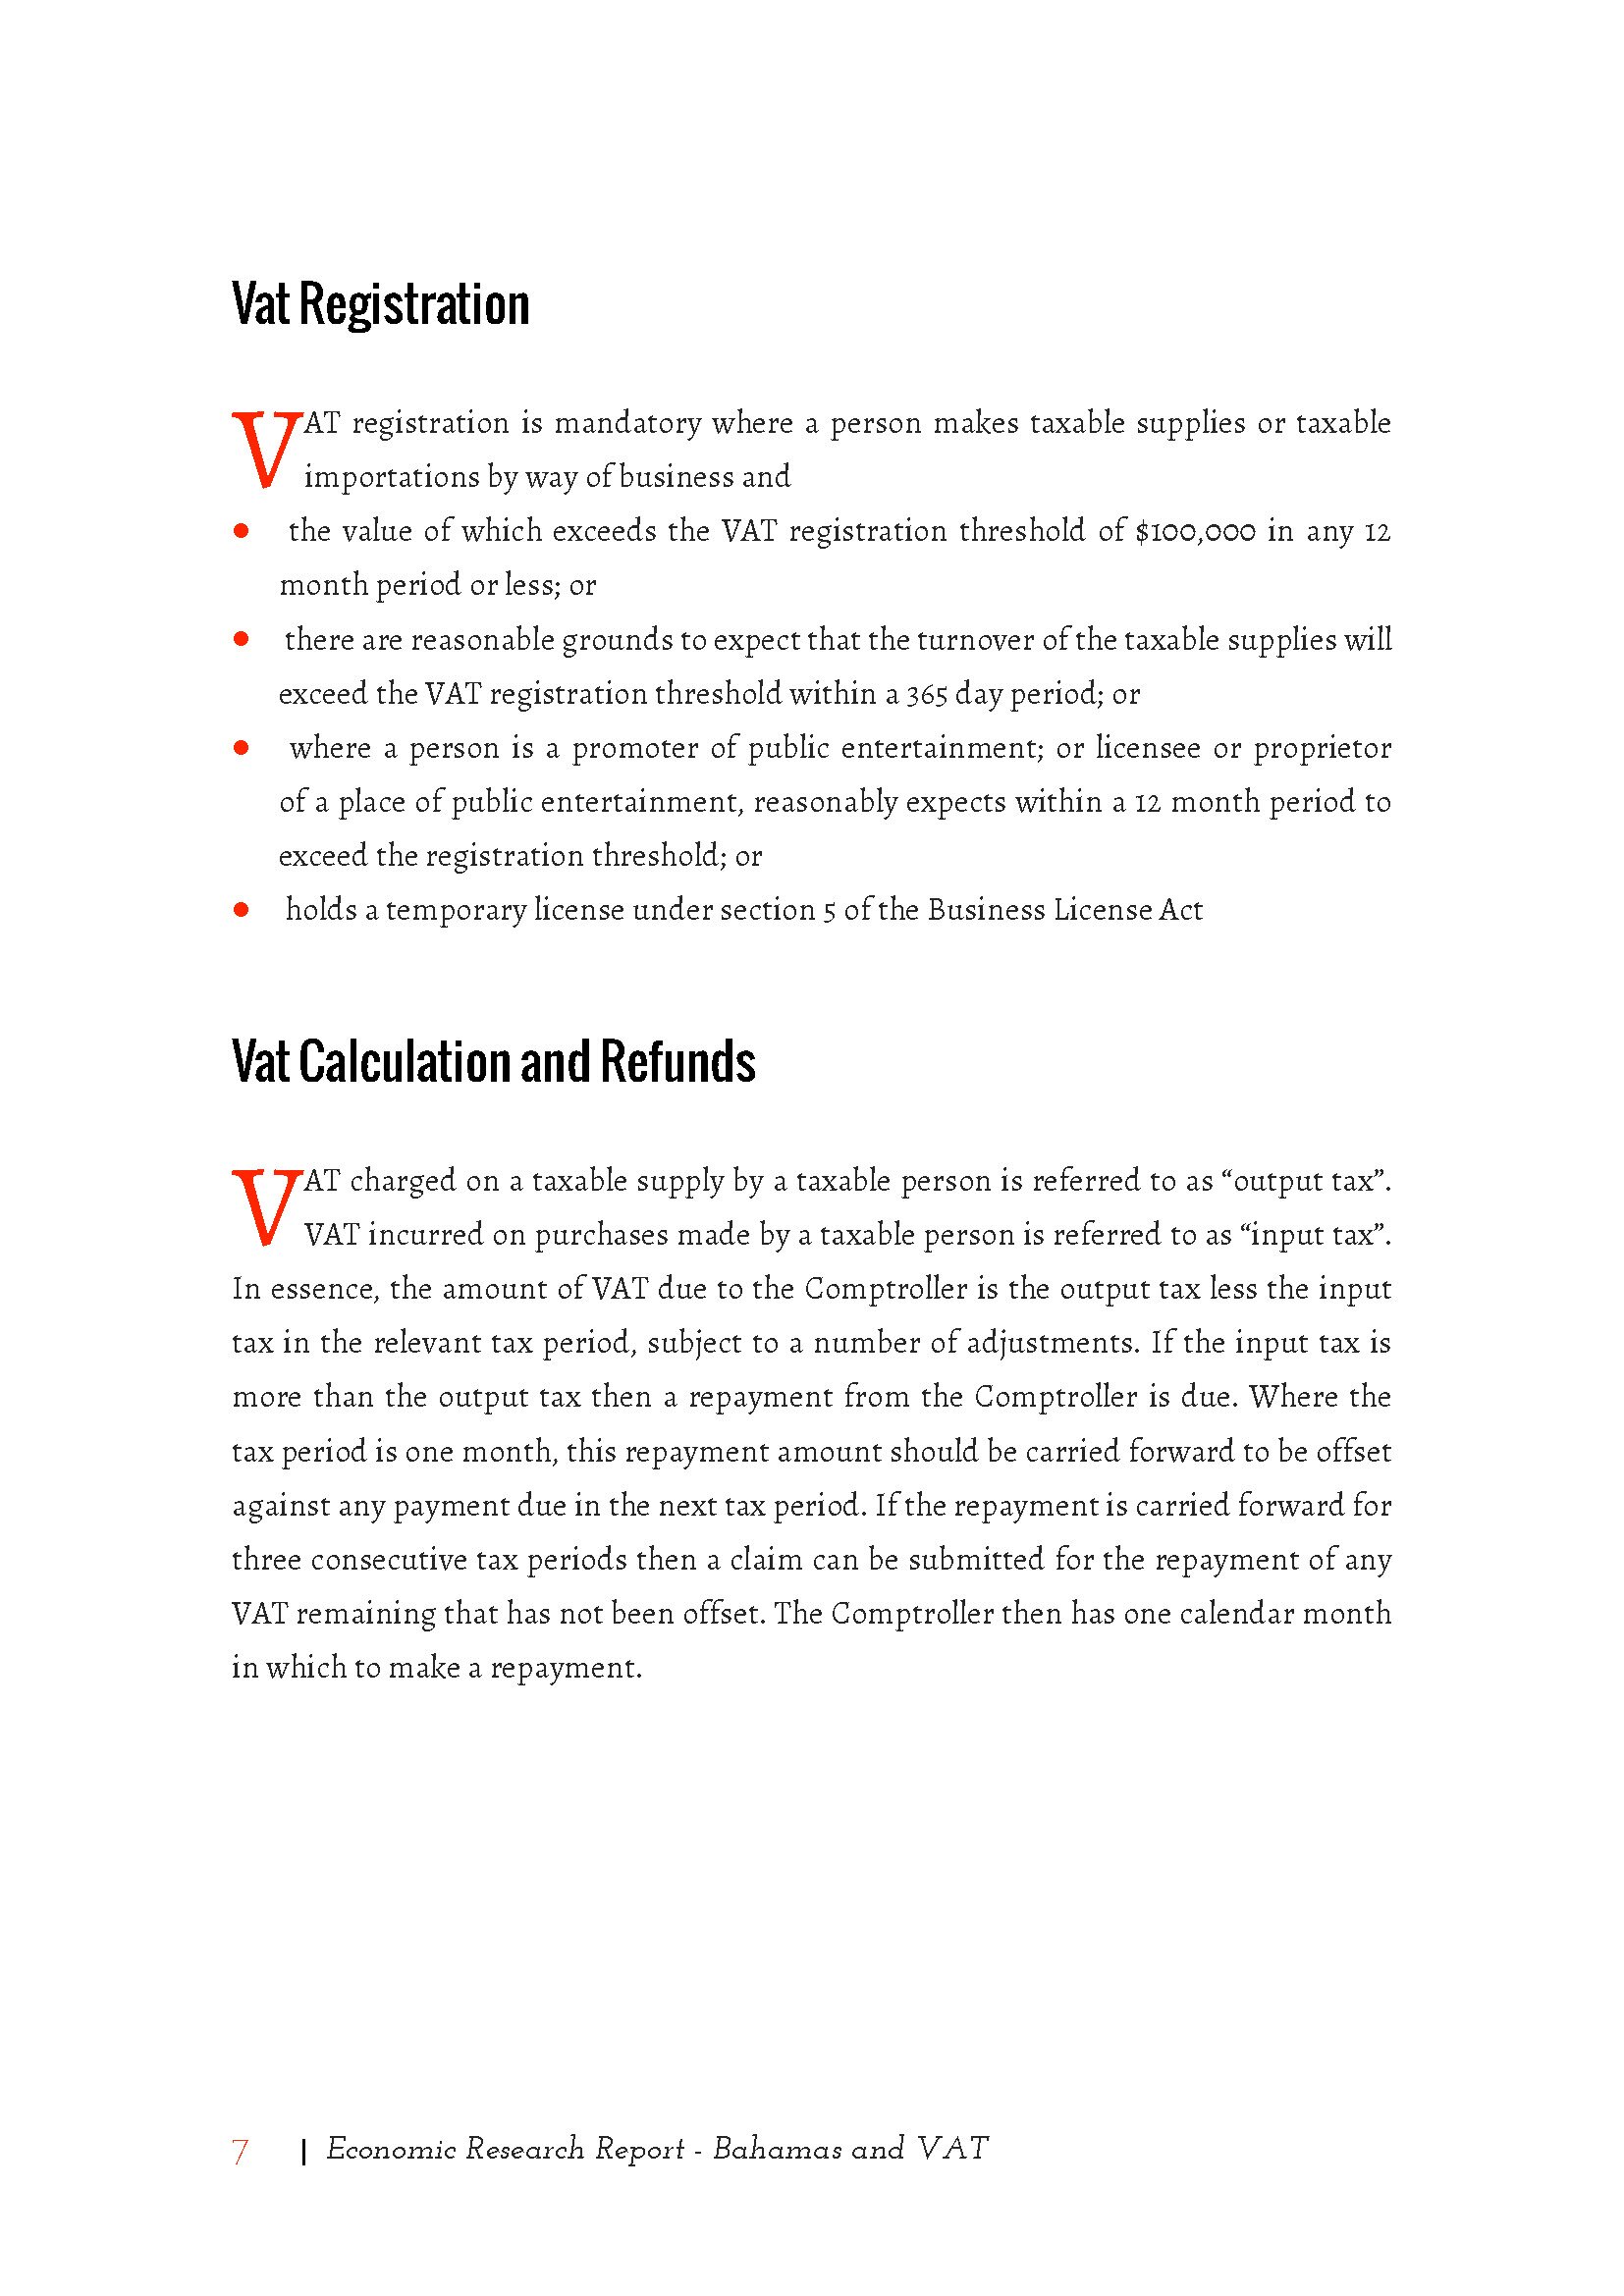 White Paper - VAT in the Bahamas_Page_07.jpg